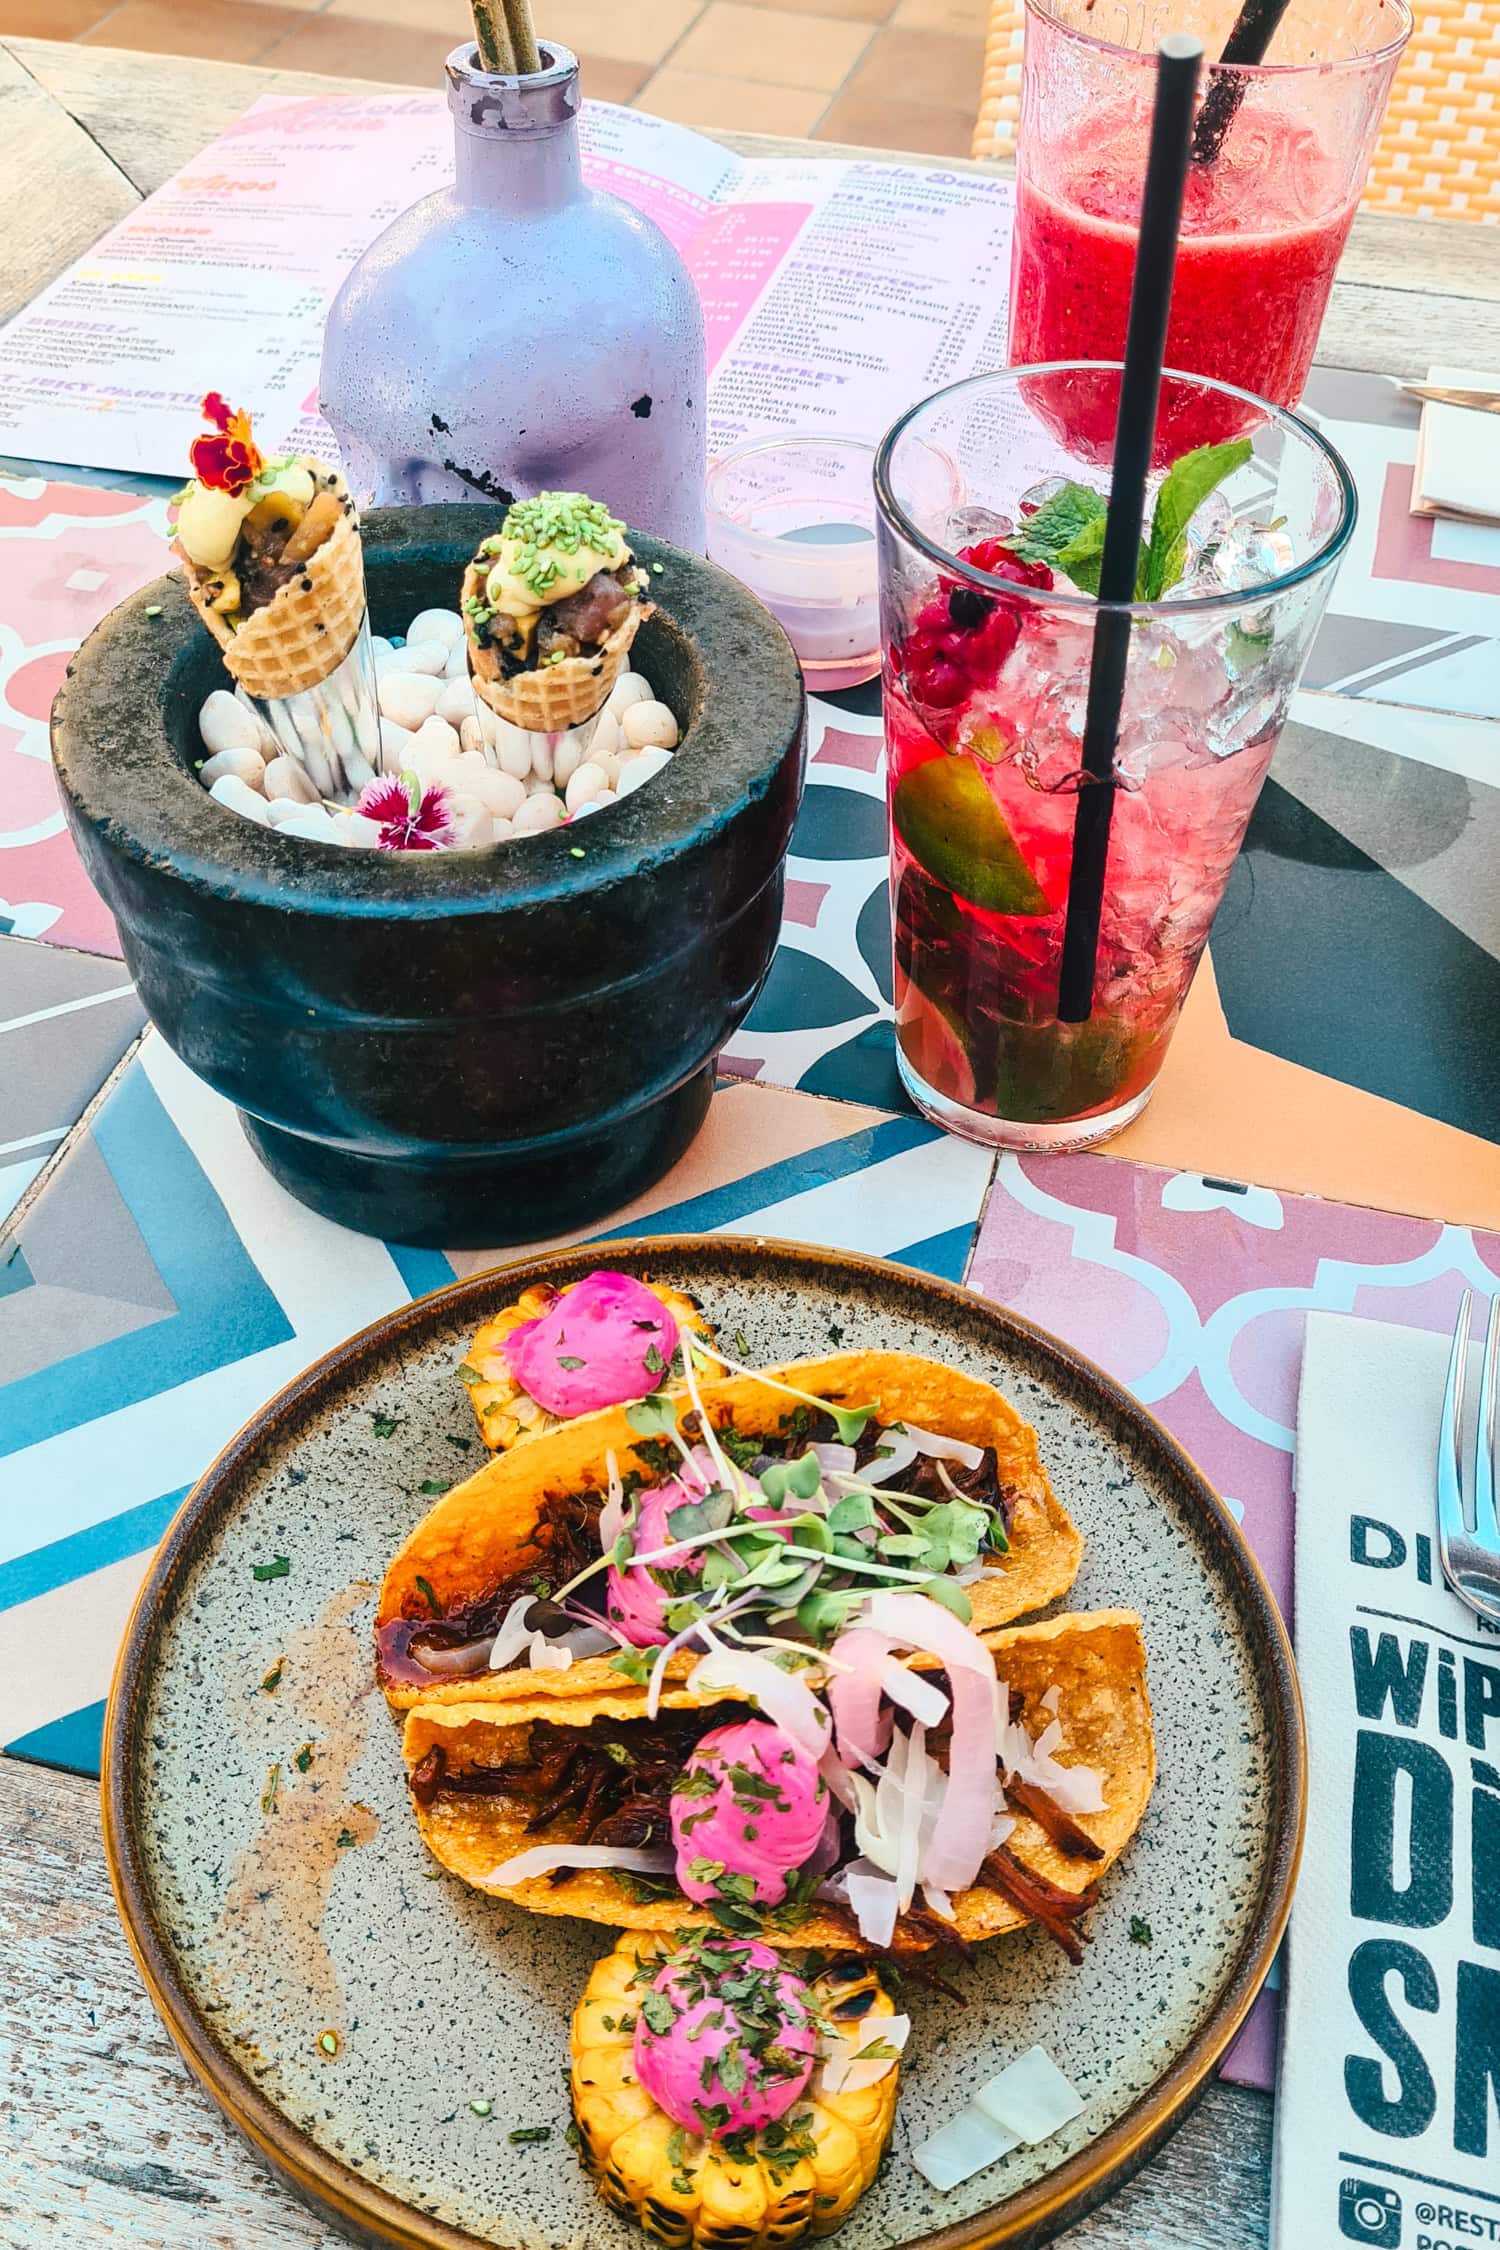 Green and brown plate with pulled pork tacos with pink sauce, strawberry mojito and tuna tartar on a colorful table at Diferent Restaurant in Cala d'Or Mallorca.